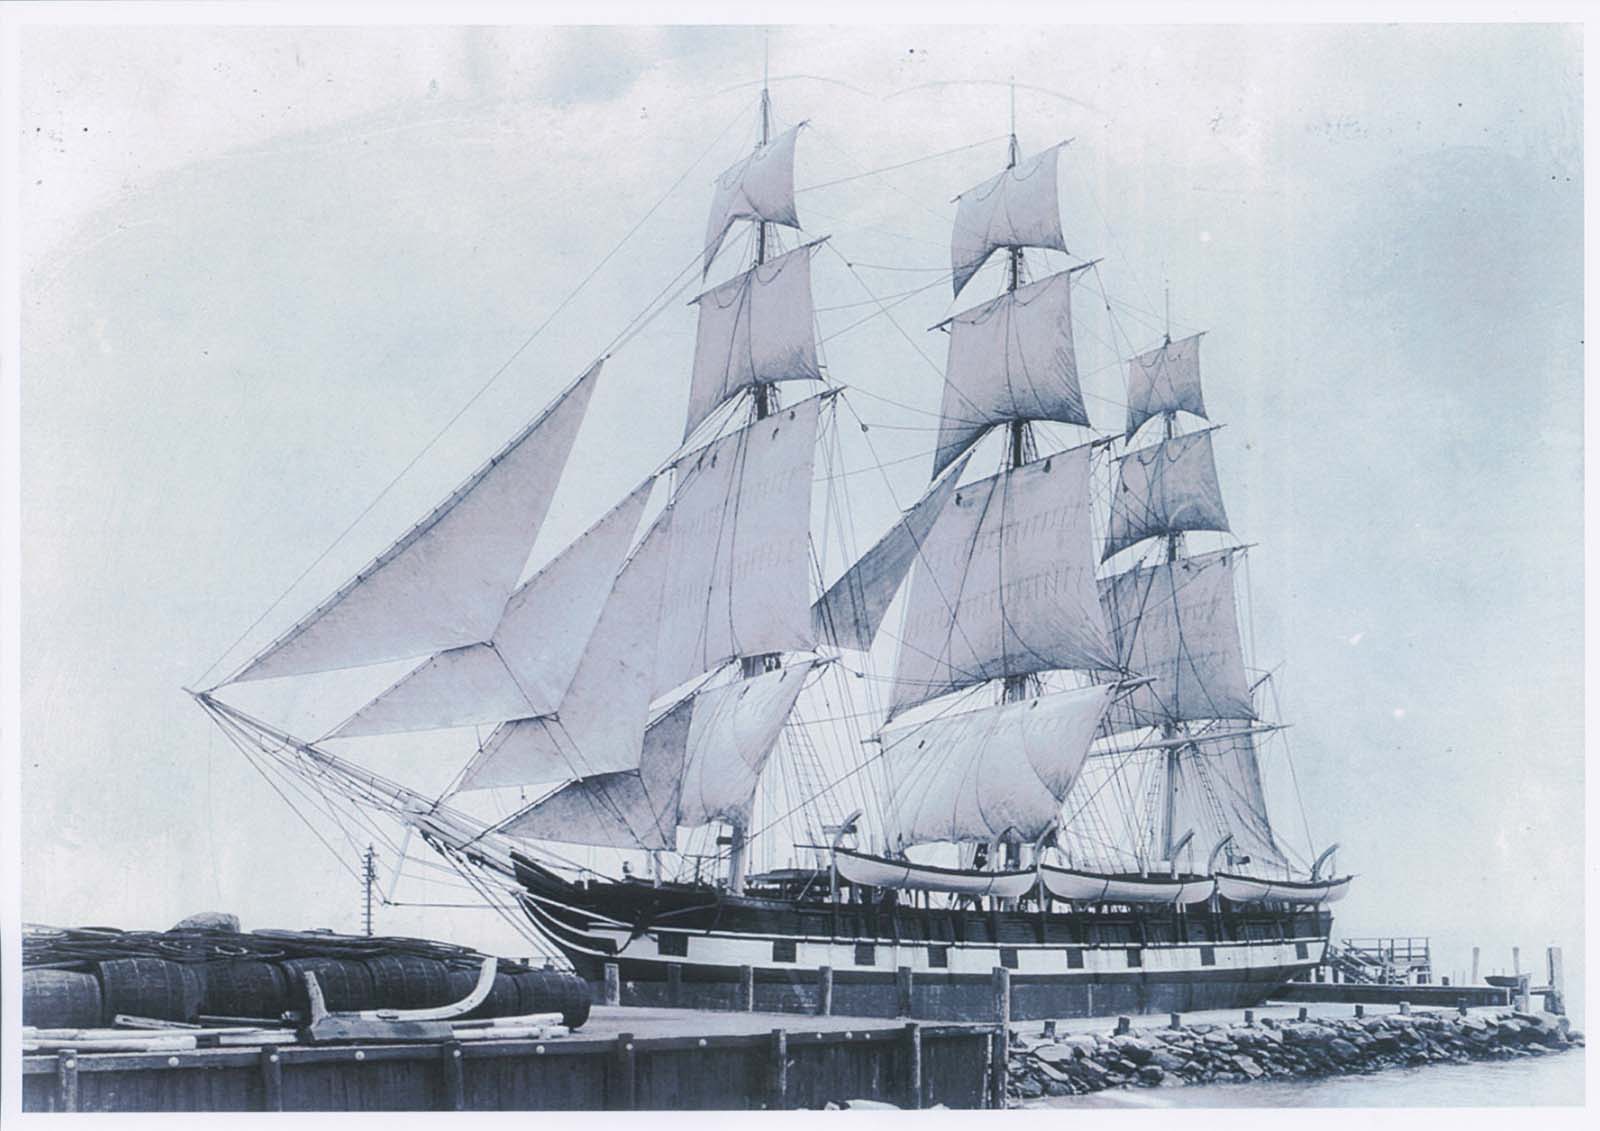 A black and white image of a ship with large, billowing sails, docked at a port. 